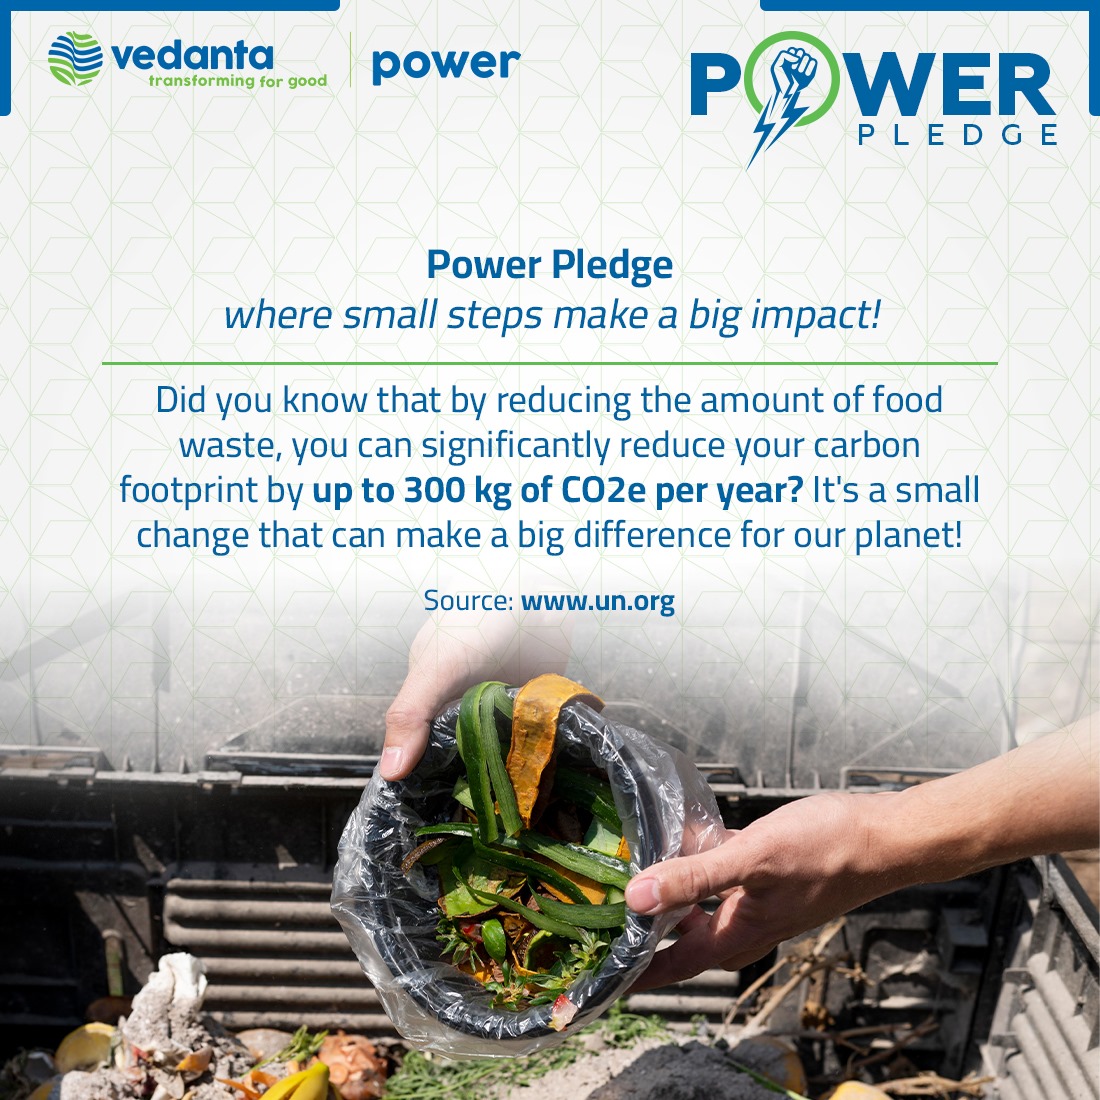 TSPL's Power Pledge encourages small steps towards conserving resources. Let's strive to make a sustainable impact!
#ConservationChampions
#VedantaPower #TSPL #PowerPledge #foodwaste #SustainableLiving #EnergyRevolution #VedantaResources #transformingforgood #LightingUpLives…